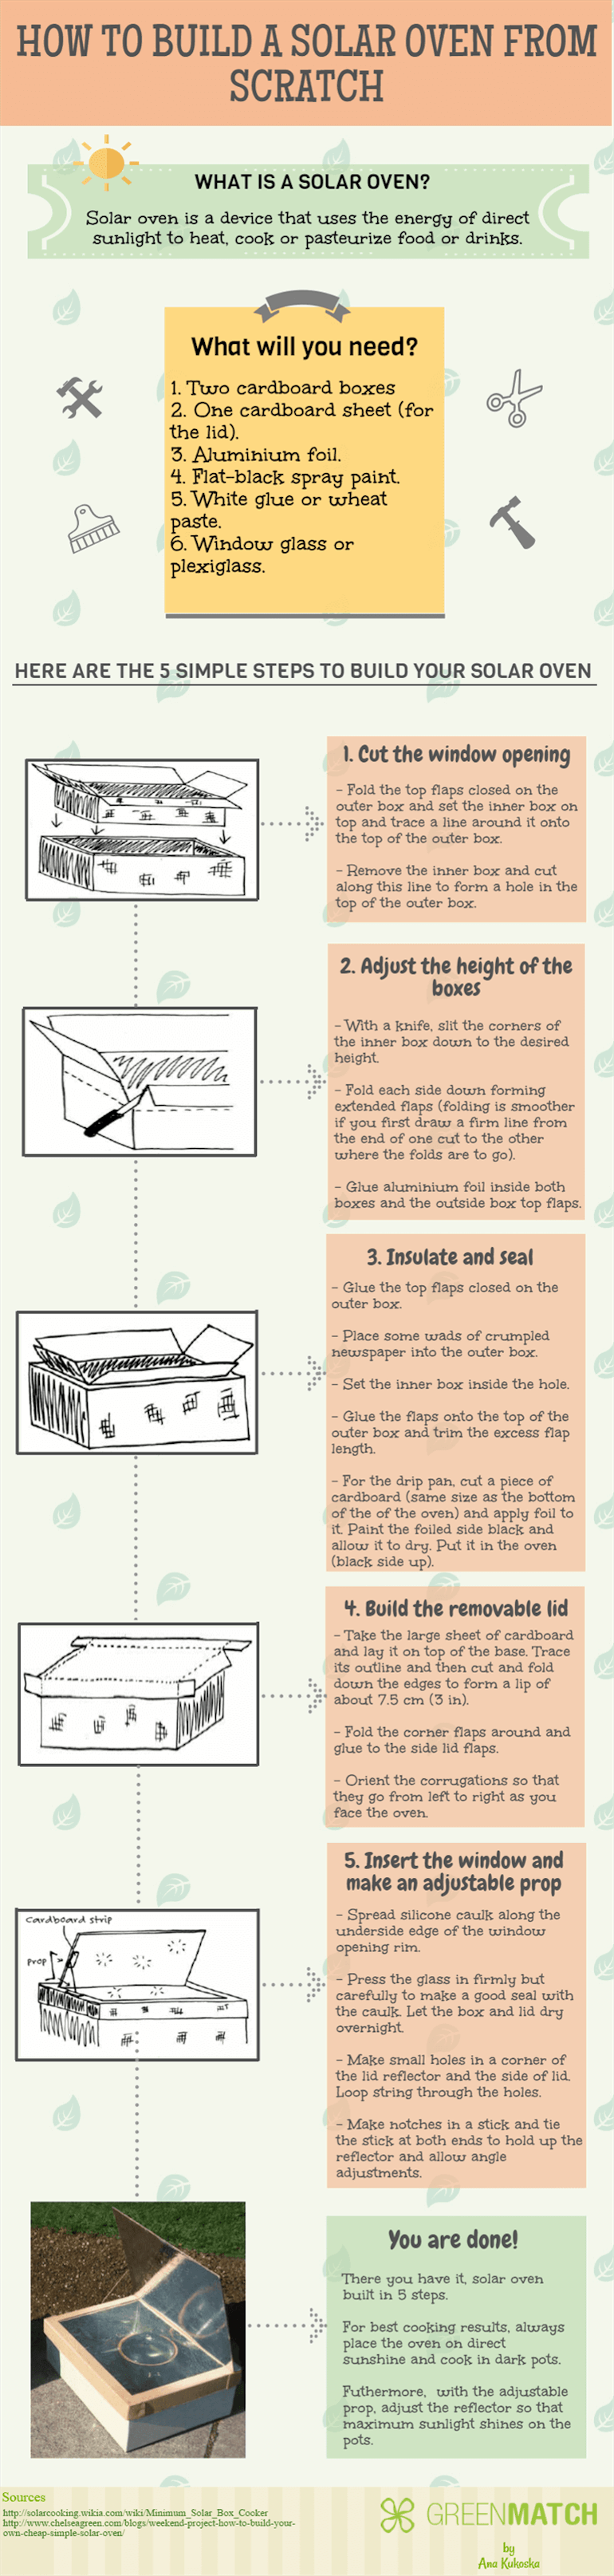 Infographic about building a solar oven from scratch